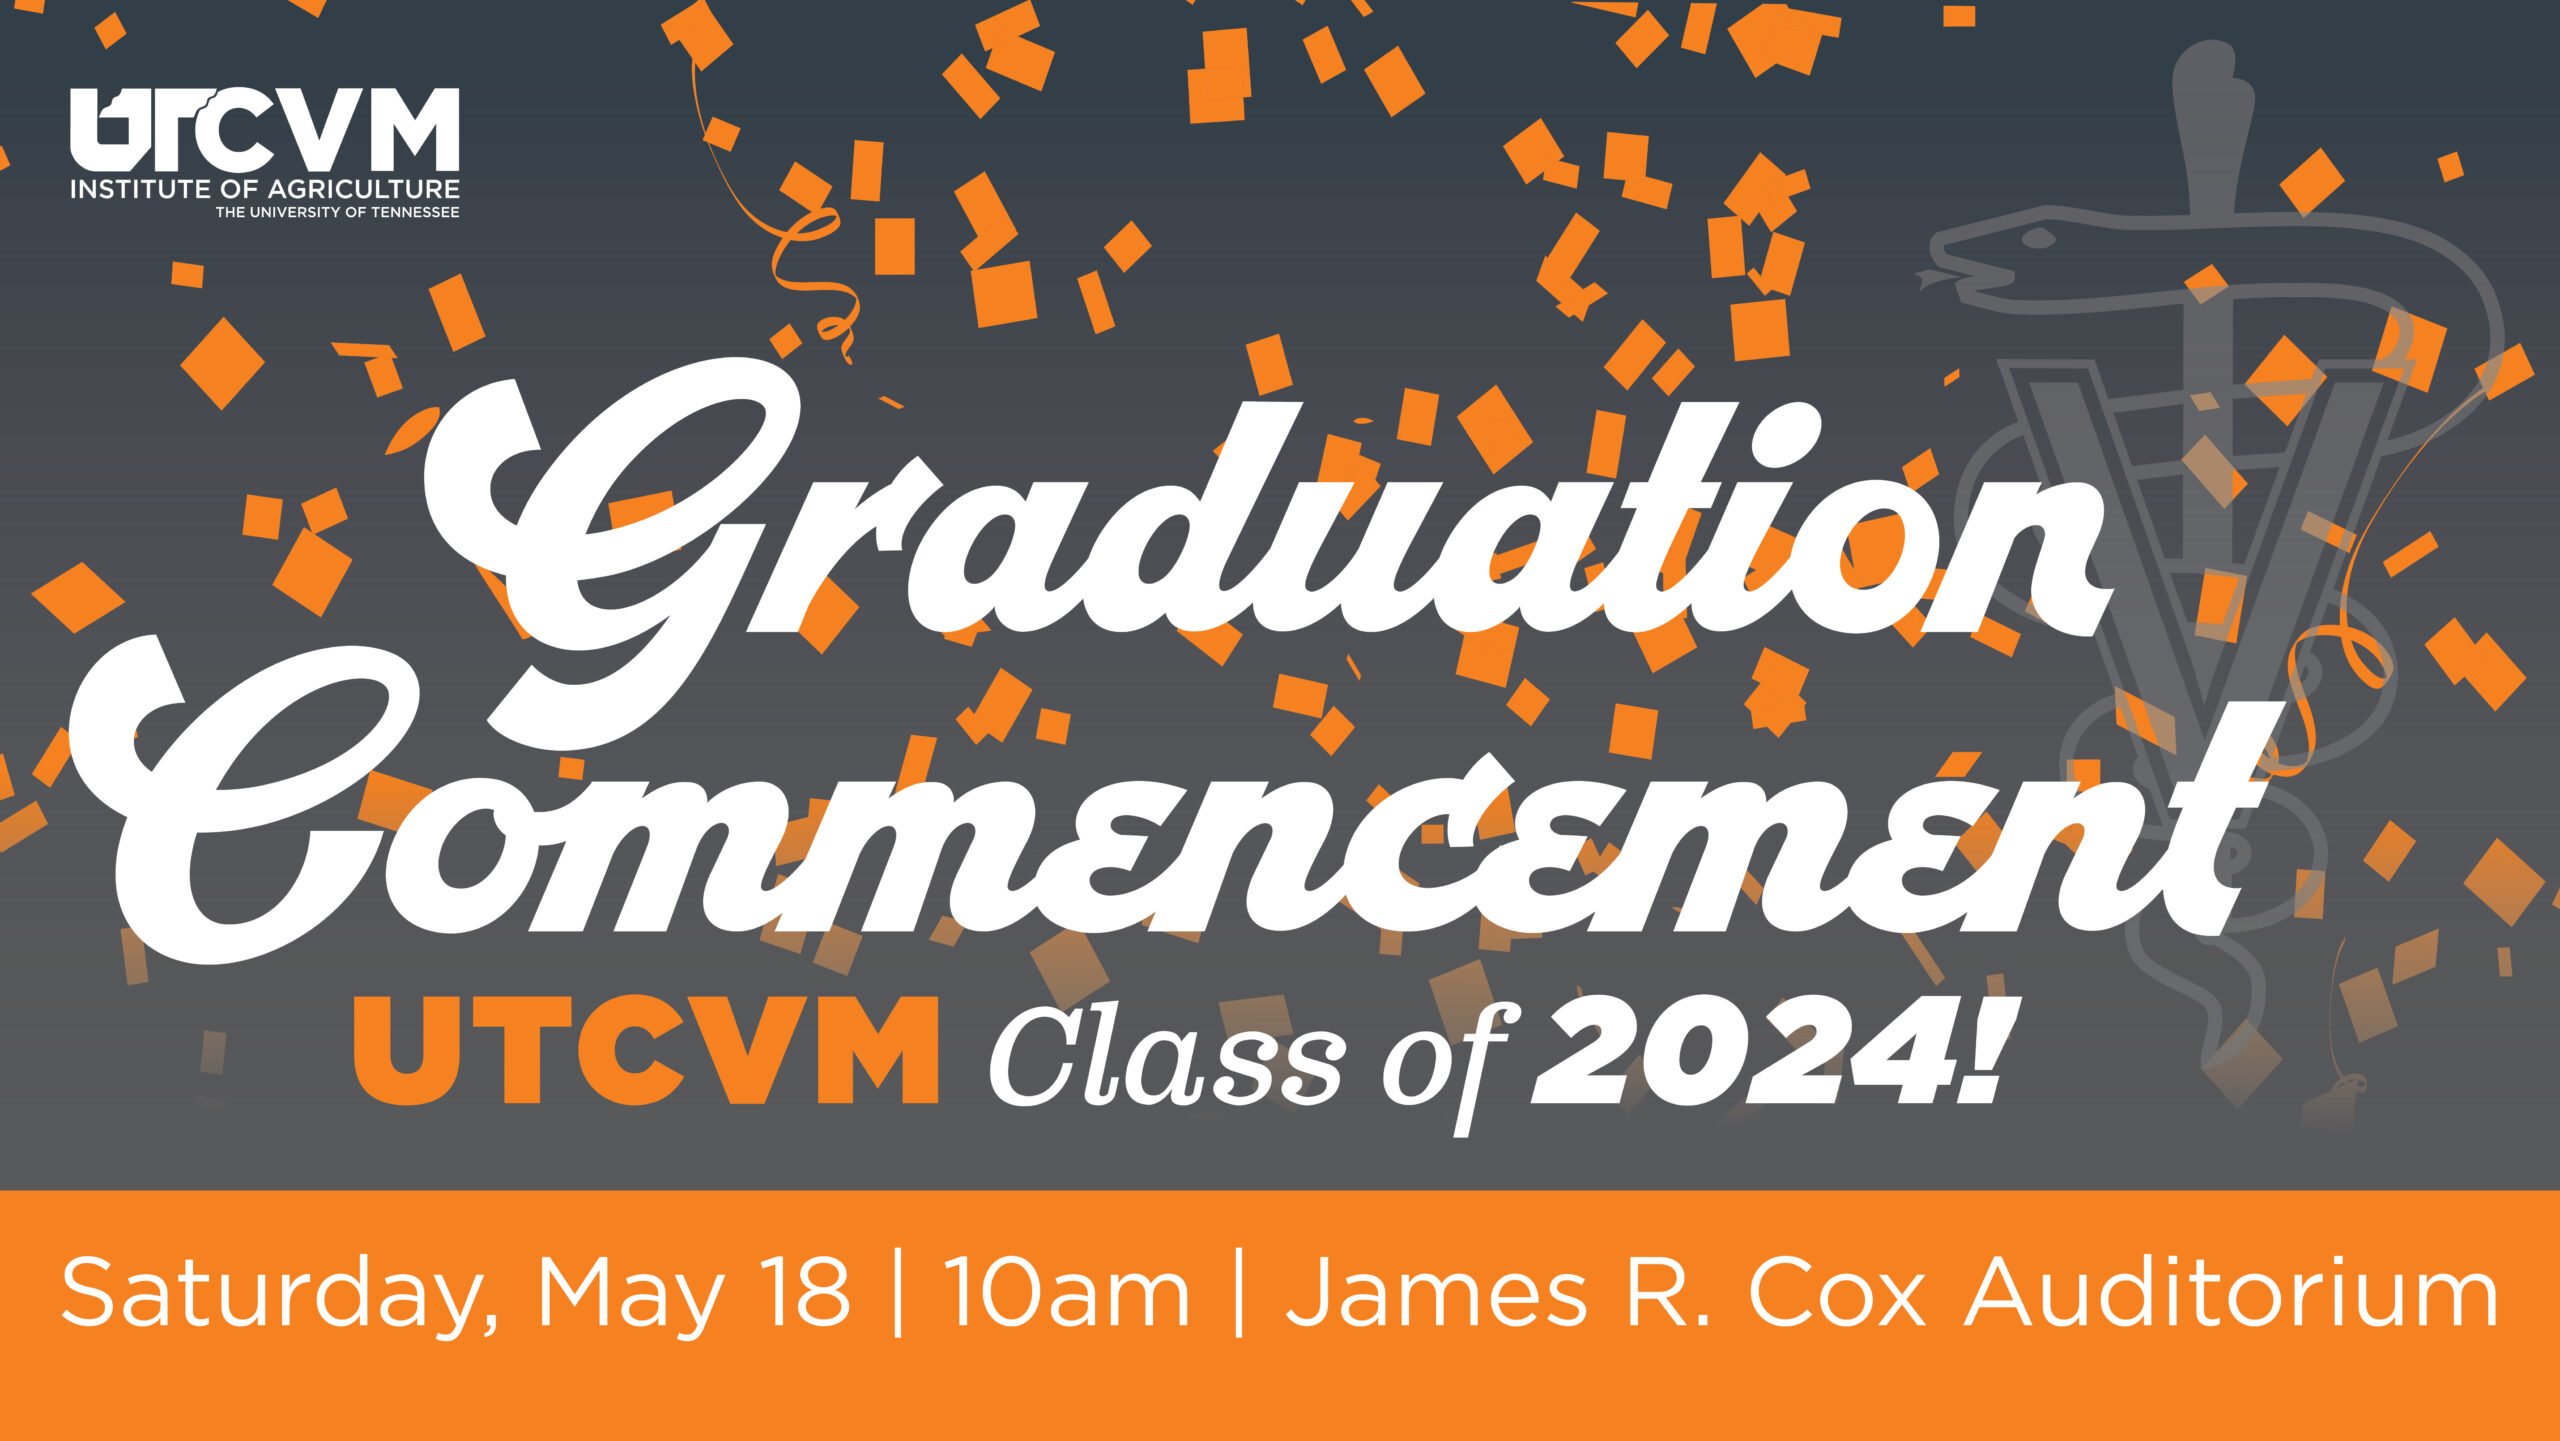 Gray, orange, and white banner that says Graduation and Commencement for the Class of 2024